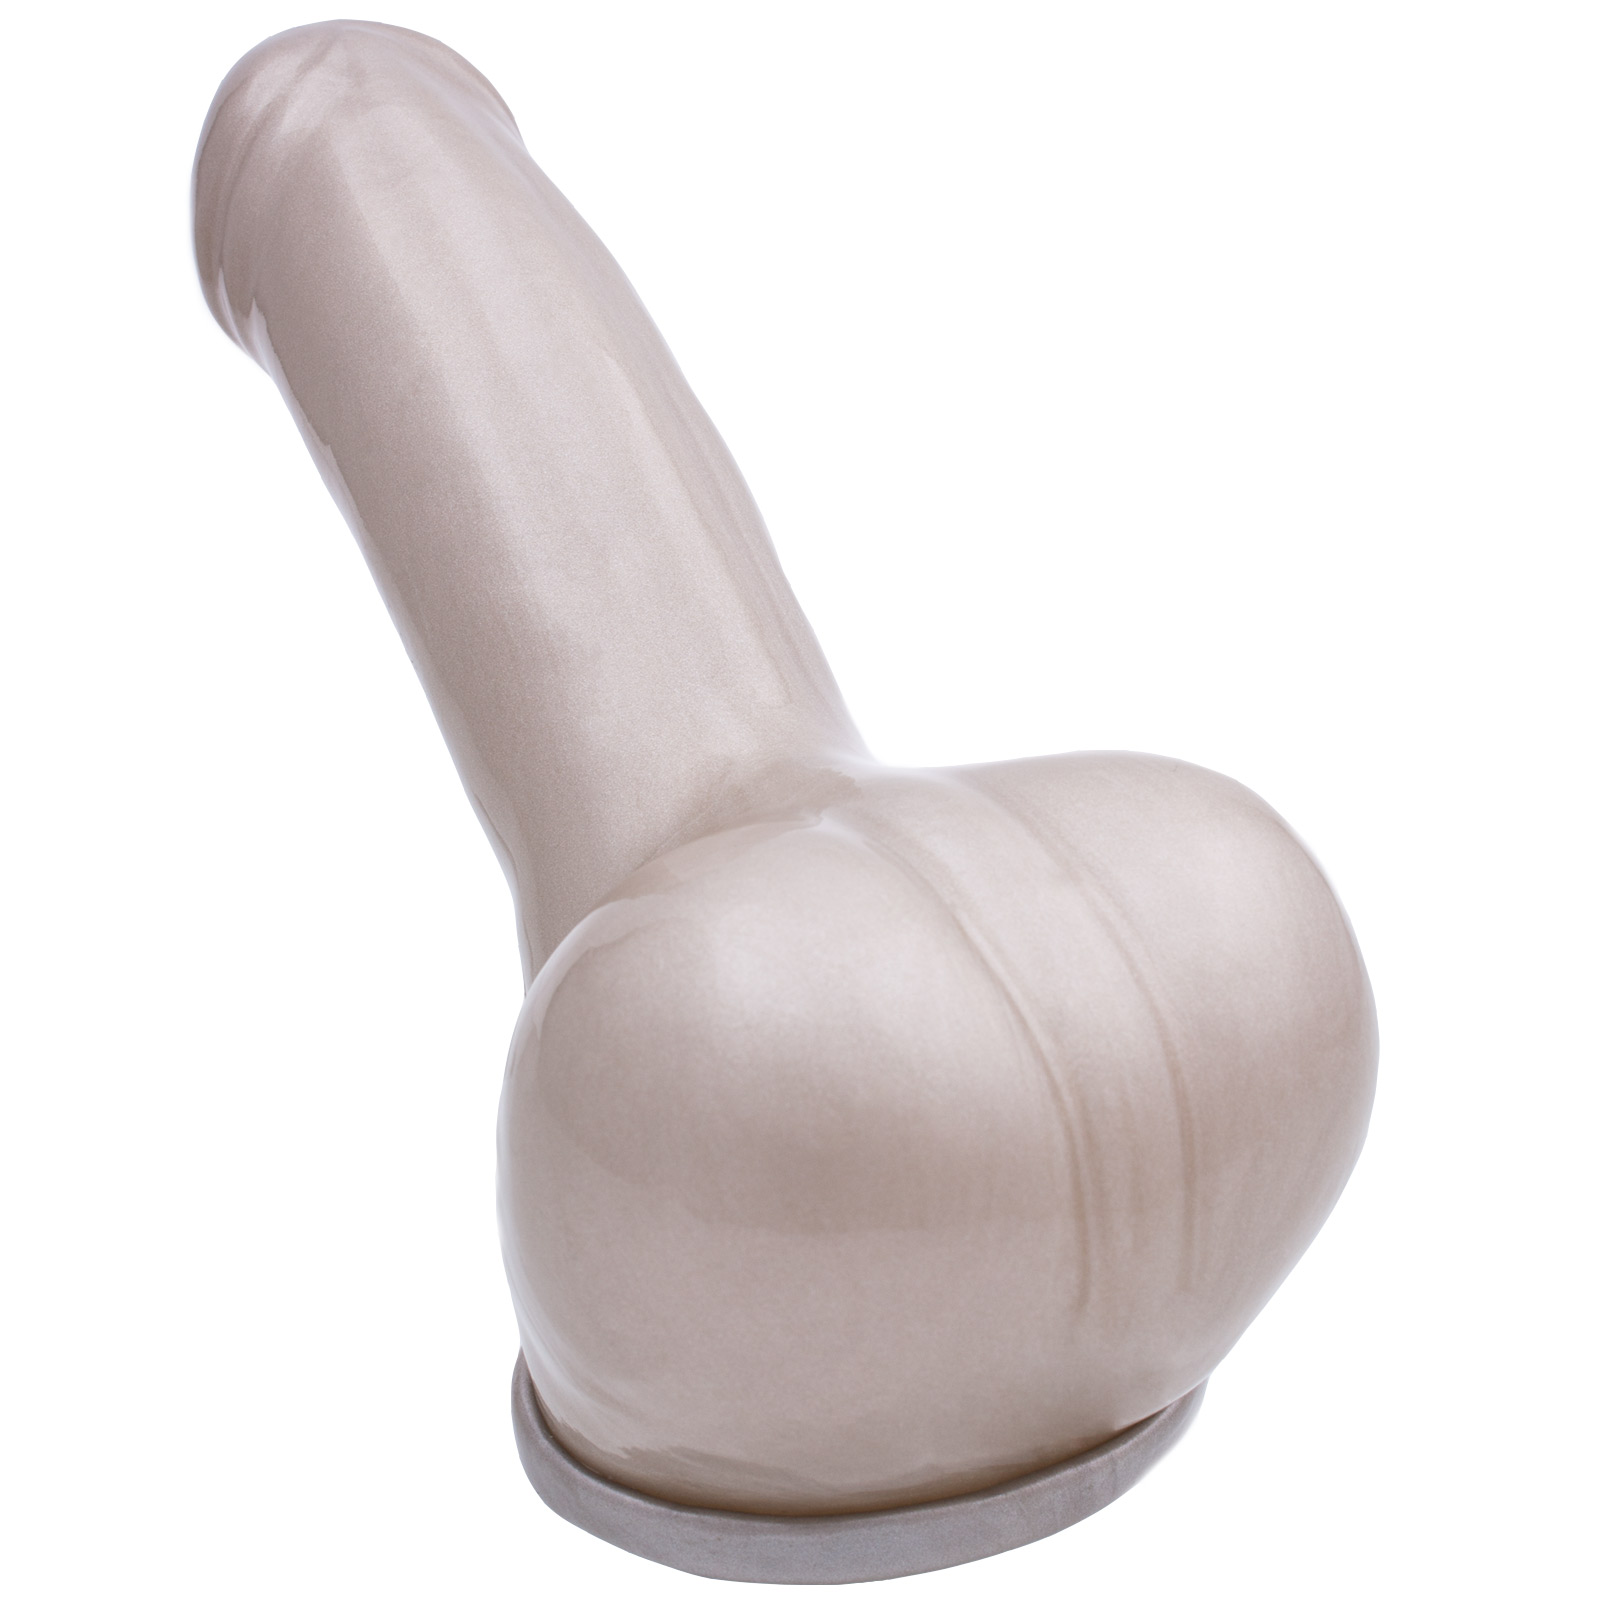 Toylie Latex Penis Sleeve «ADAM 5.5» silver, with molded glans and scrotum